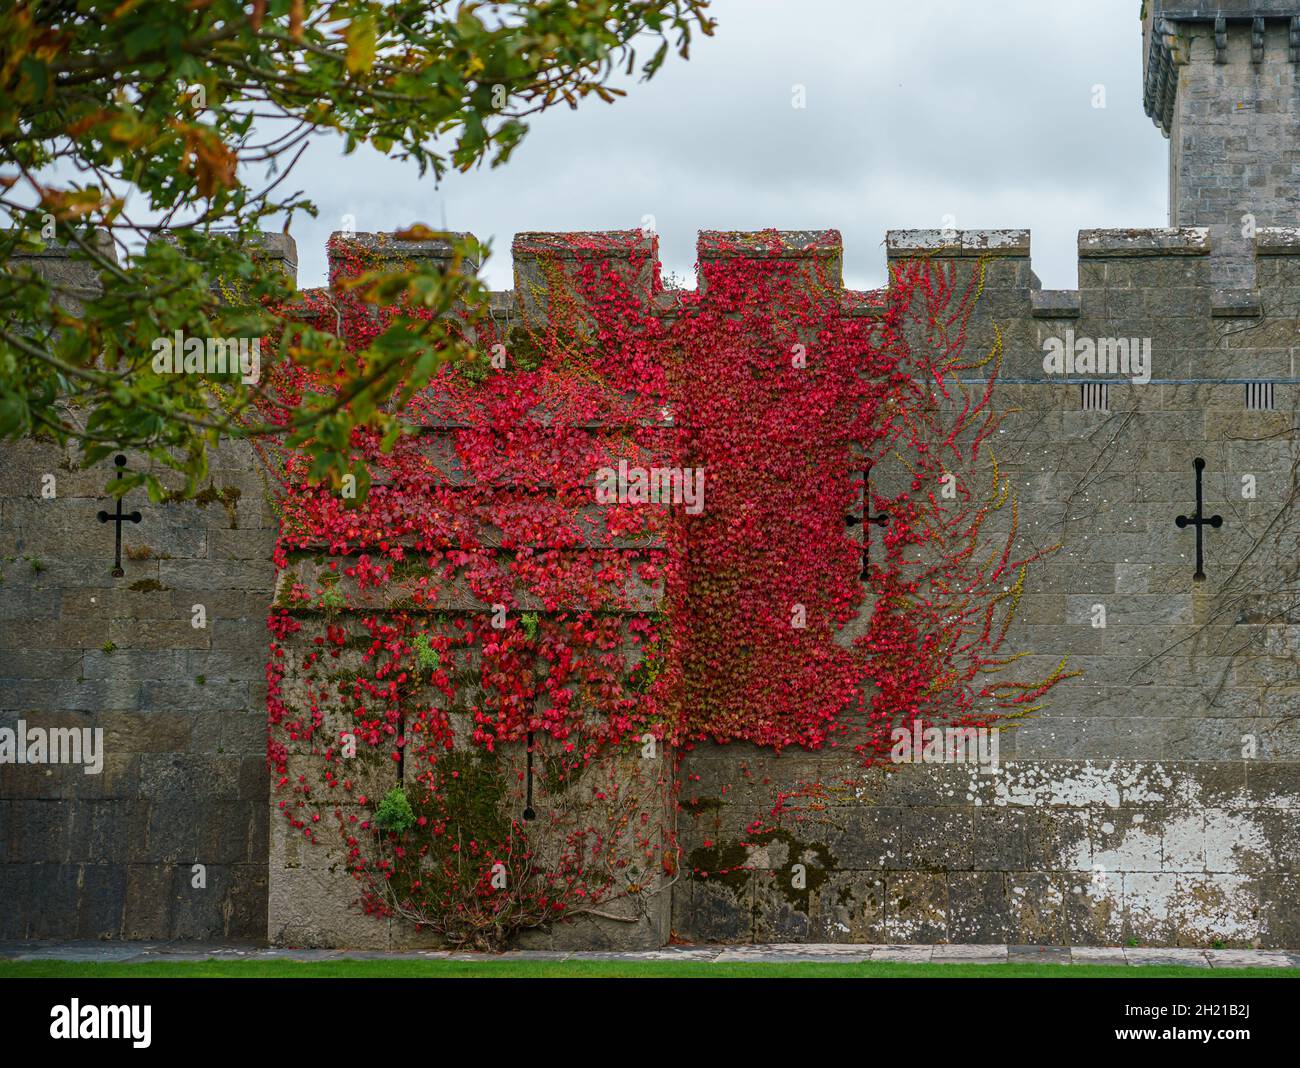 Virginia creeper (Parthenocissus quinquefolia) climbing the external walls Penrhyn Castle, an extensive country house in Llandygai Bangor Wales UK Stock Photo